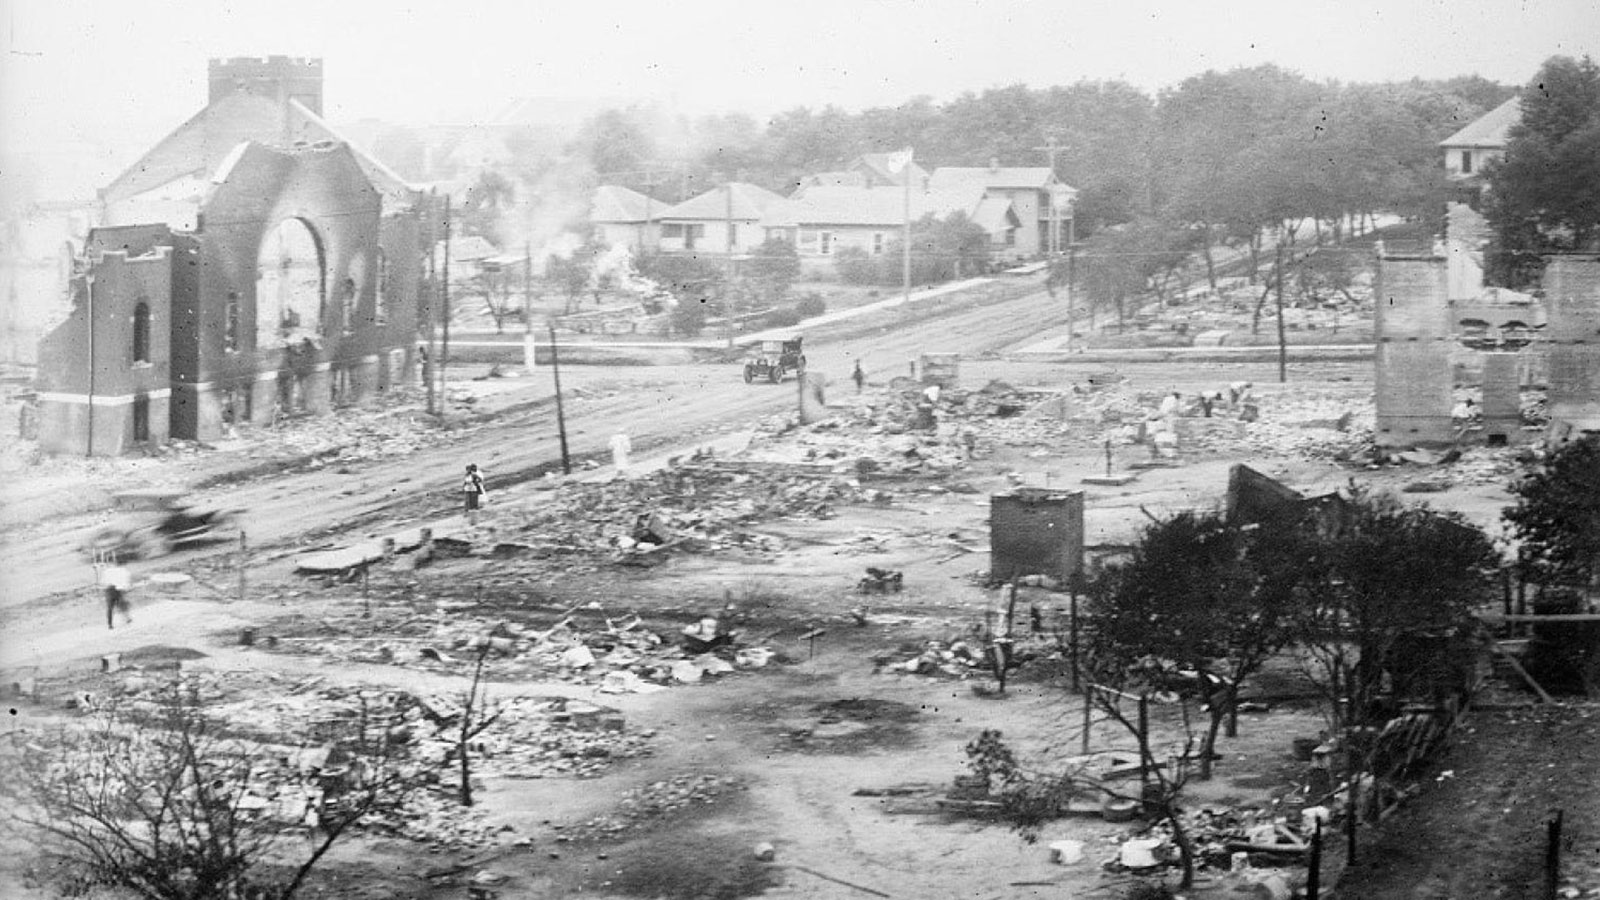 Part of Greenwood district burned during the Tulsa race massacre, Tulsa, Oklahoma, in June 1921.